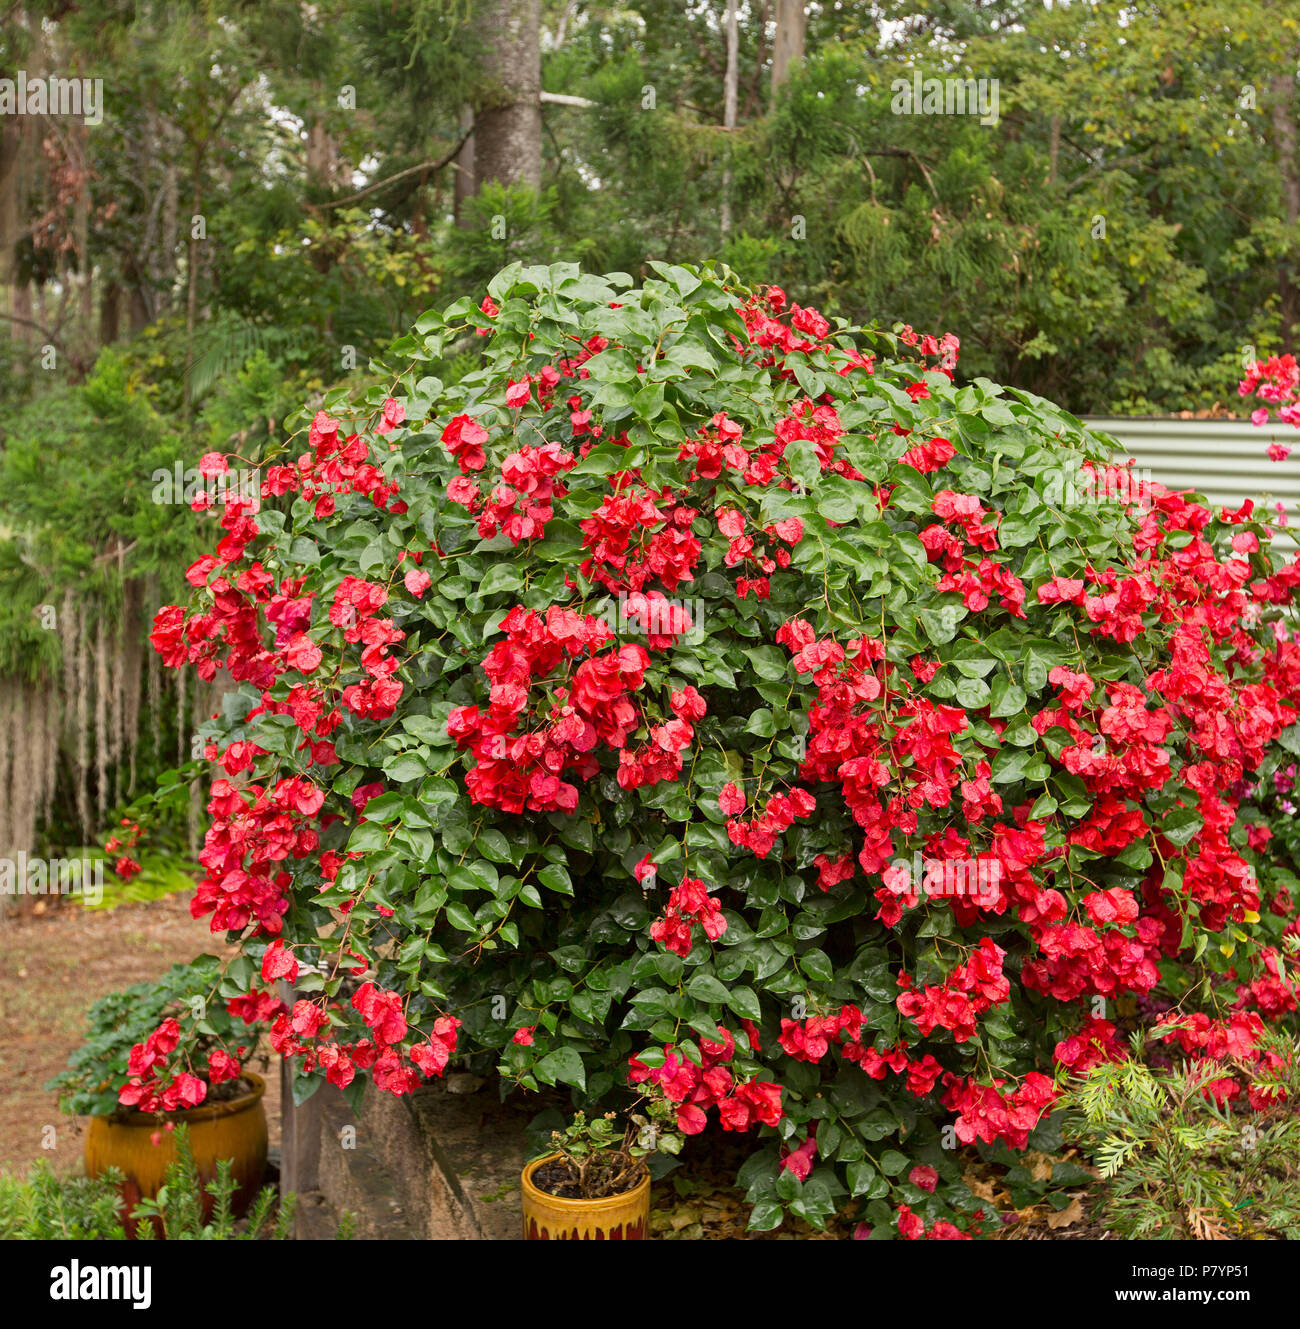 Bambino bougainvillea 'Jazzi', low drought tolerant shrub with masses of vivid red flowers and green foliage Stock Photo